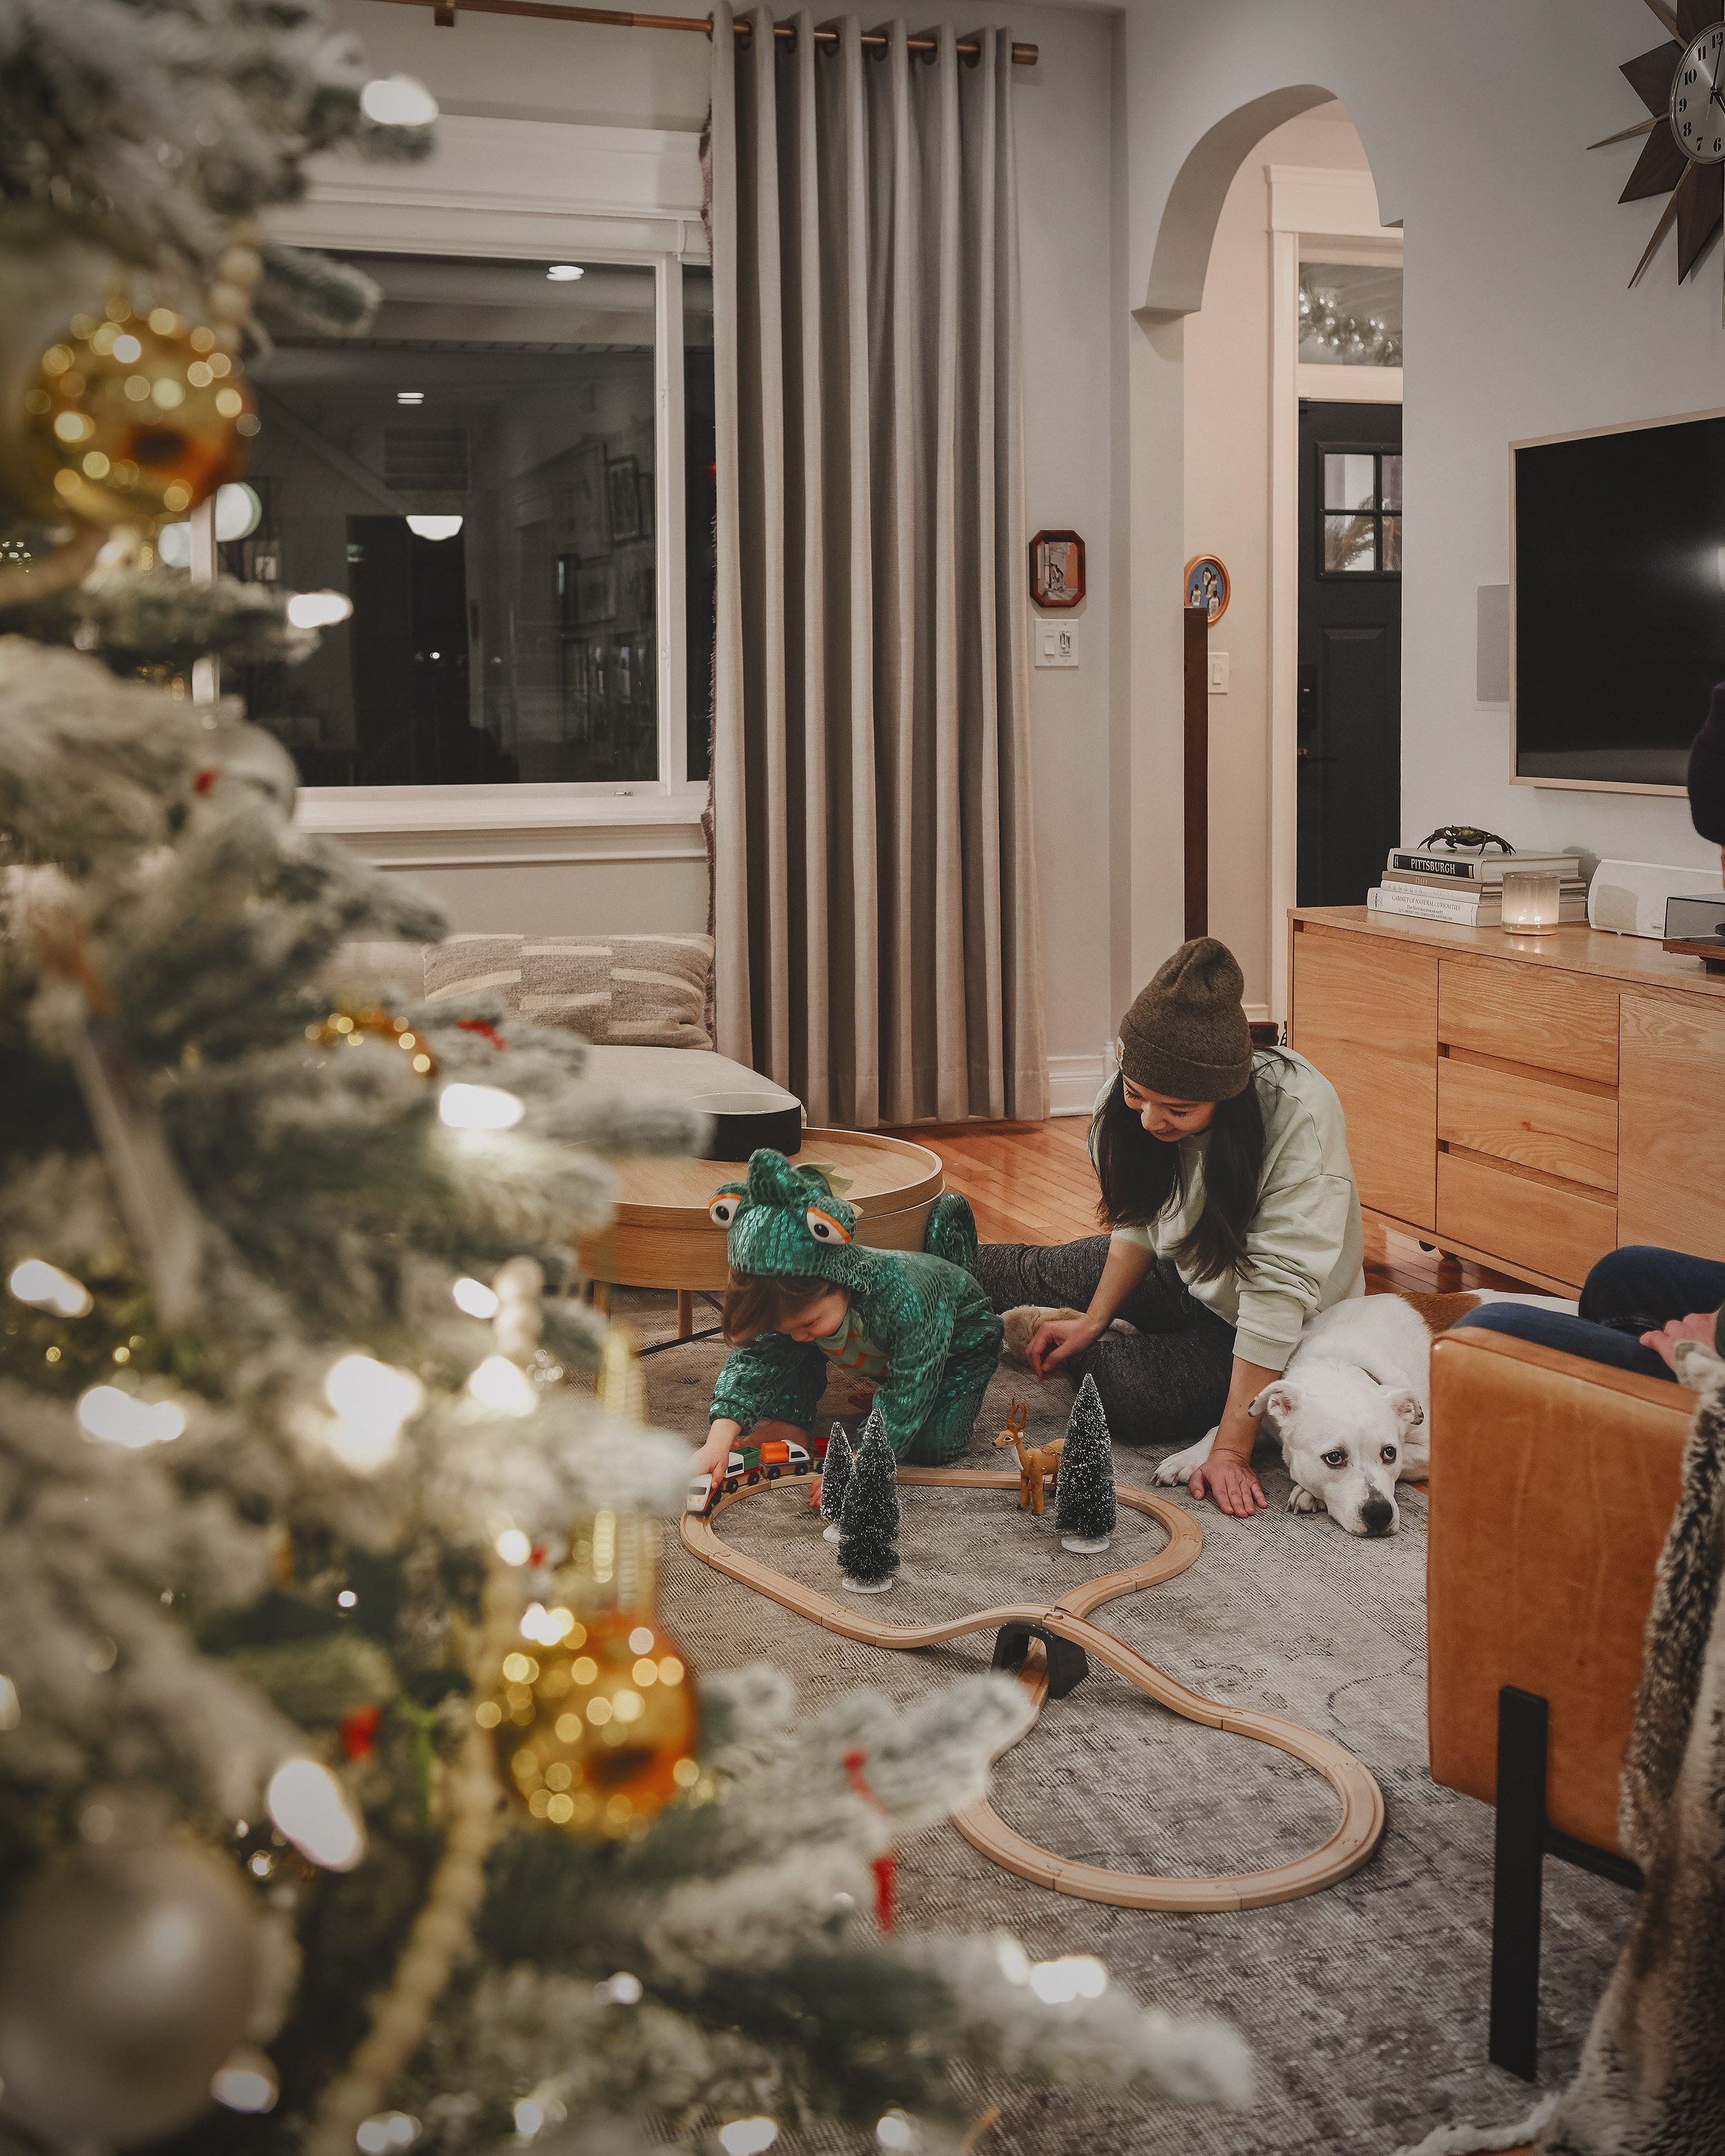 Kim, Lucy and Catfish enjoy creating a Christmas village with train tracks as a part of their holiday time together | via Yellow Brick Home